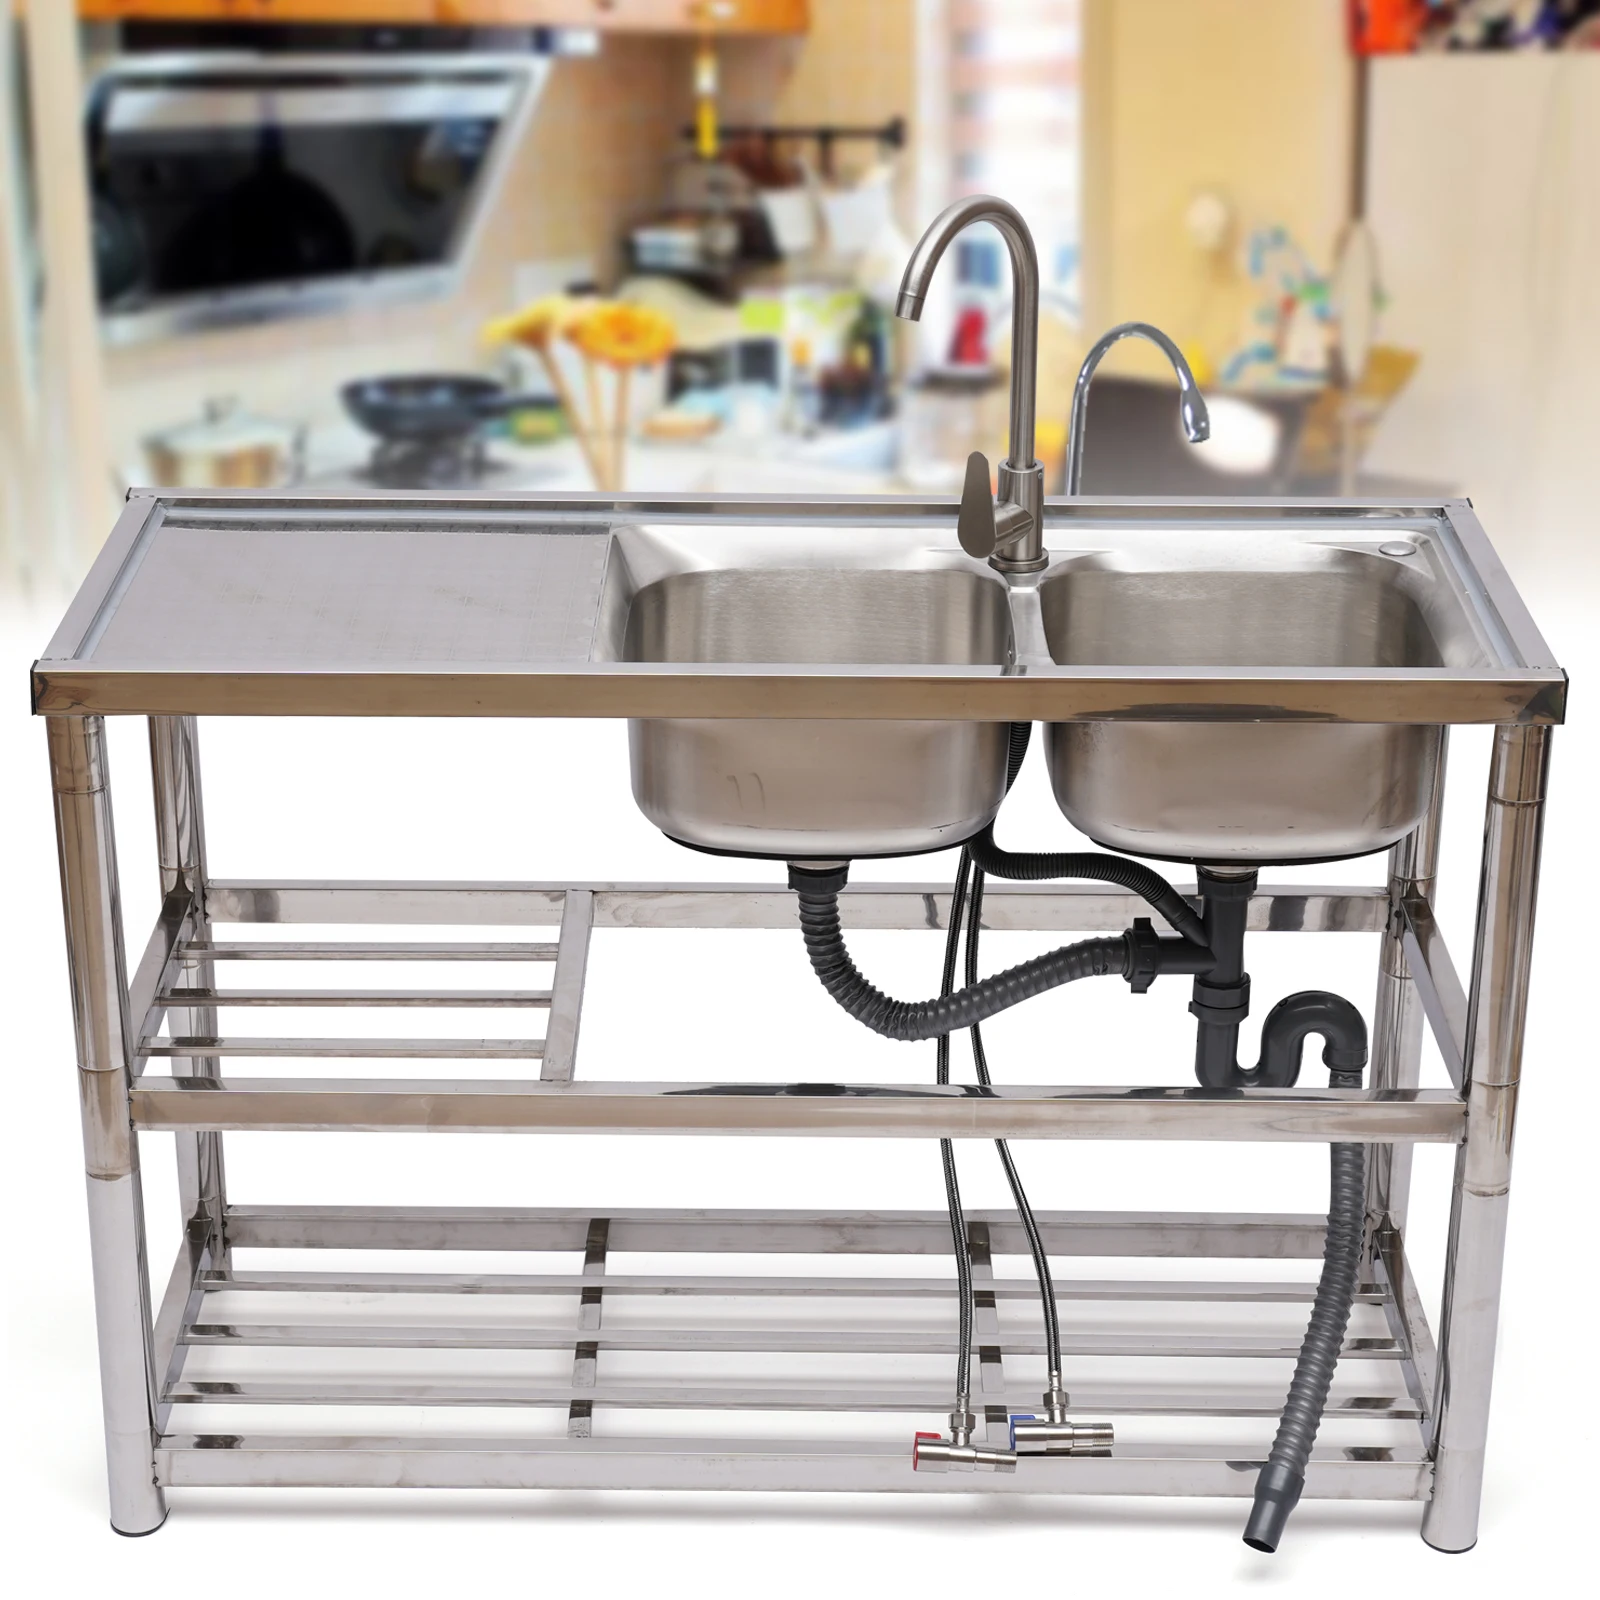 

2 Compartment Stainless Steel Commercial Kitchen Restaurant Utility Sink Dish Washing Disinfection Pool With Standing Rack